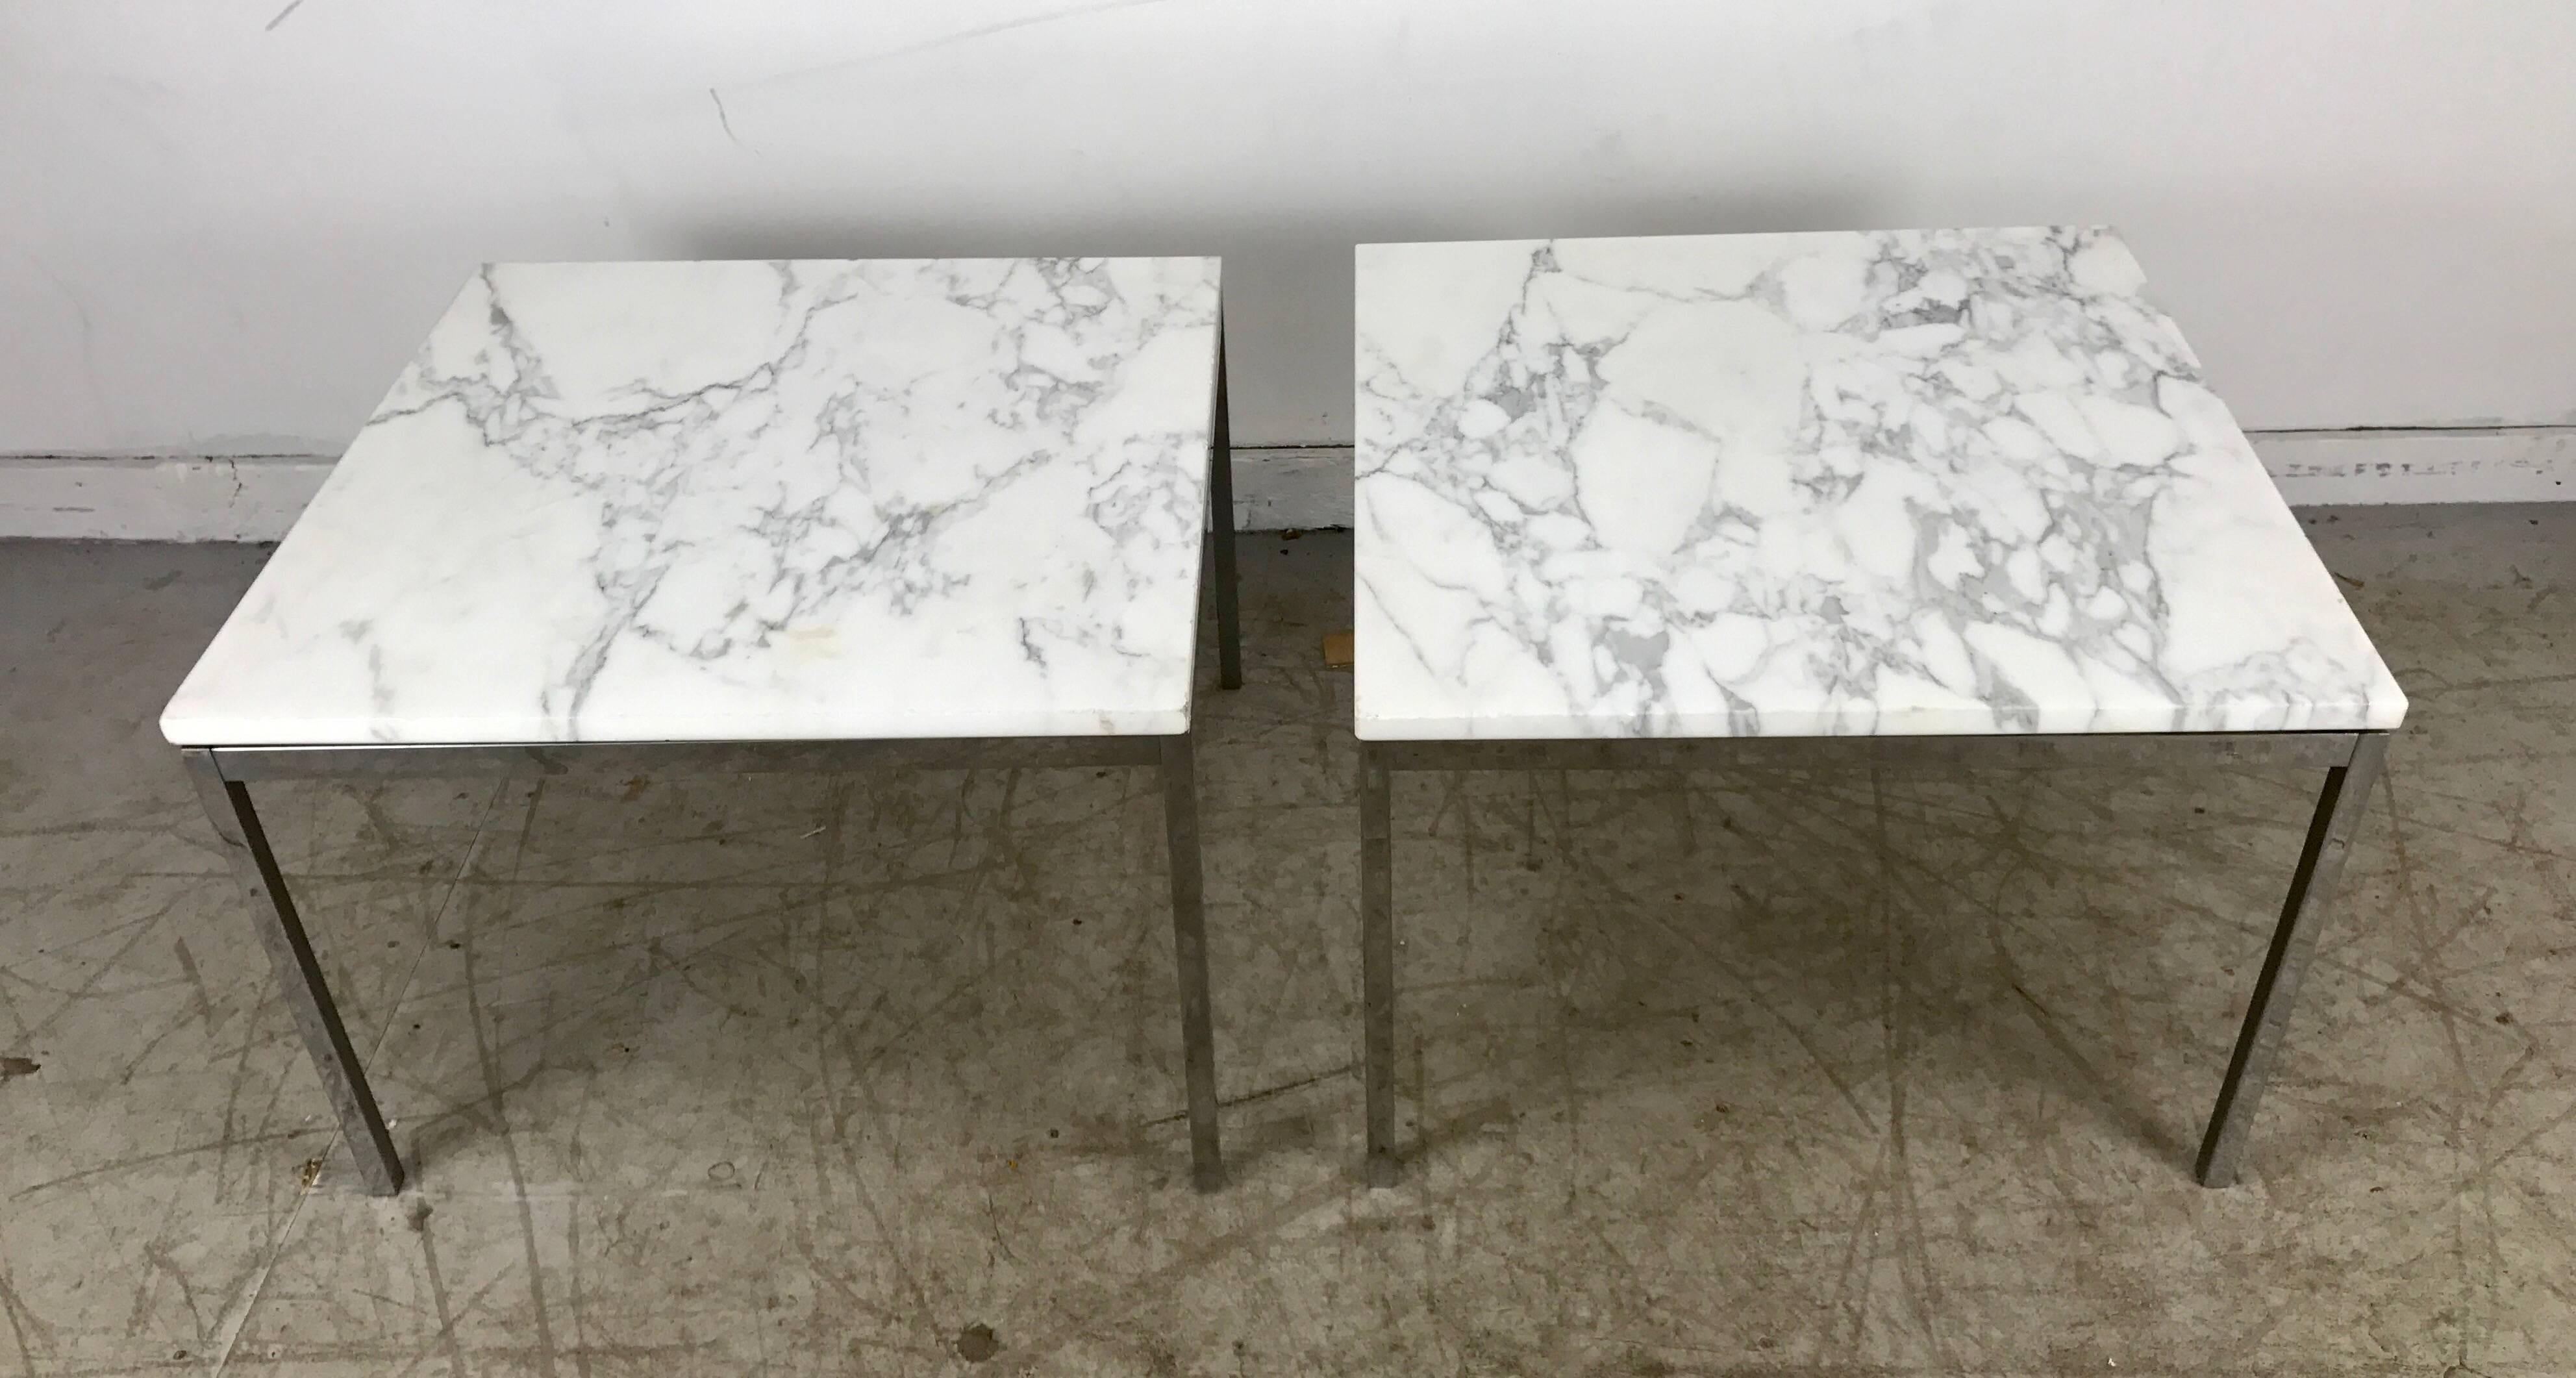 Classic pair of florence knoll marble and stainless end tables/knoll. Original white Carrara marble with black veining. Retains original Knoll New York label. Minor chips to edge and some staining. Age appropriate wear.